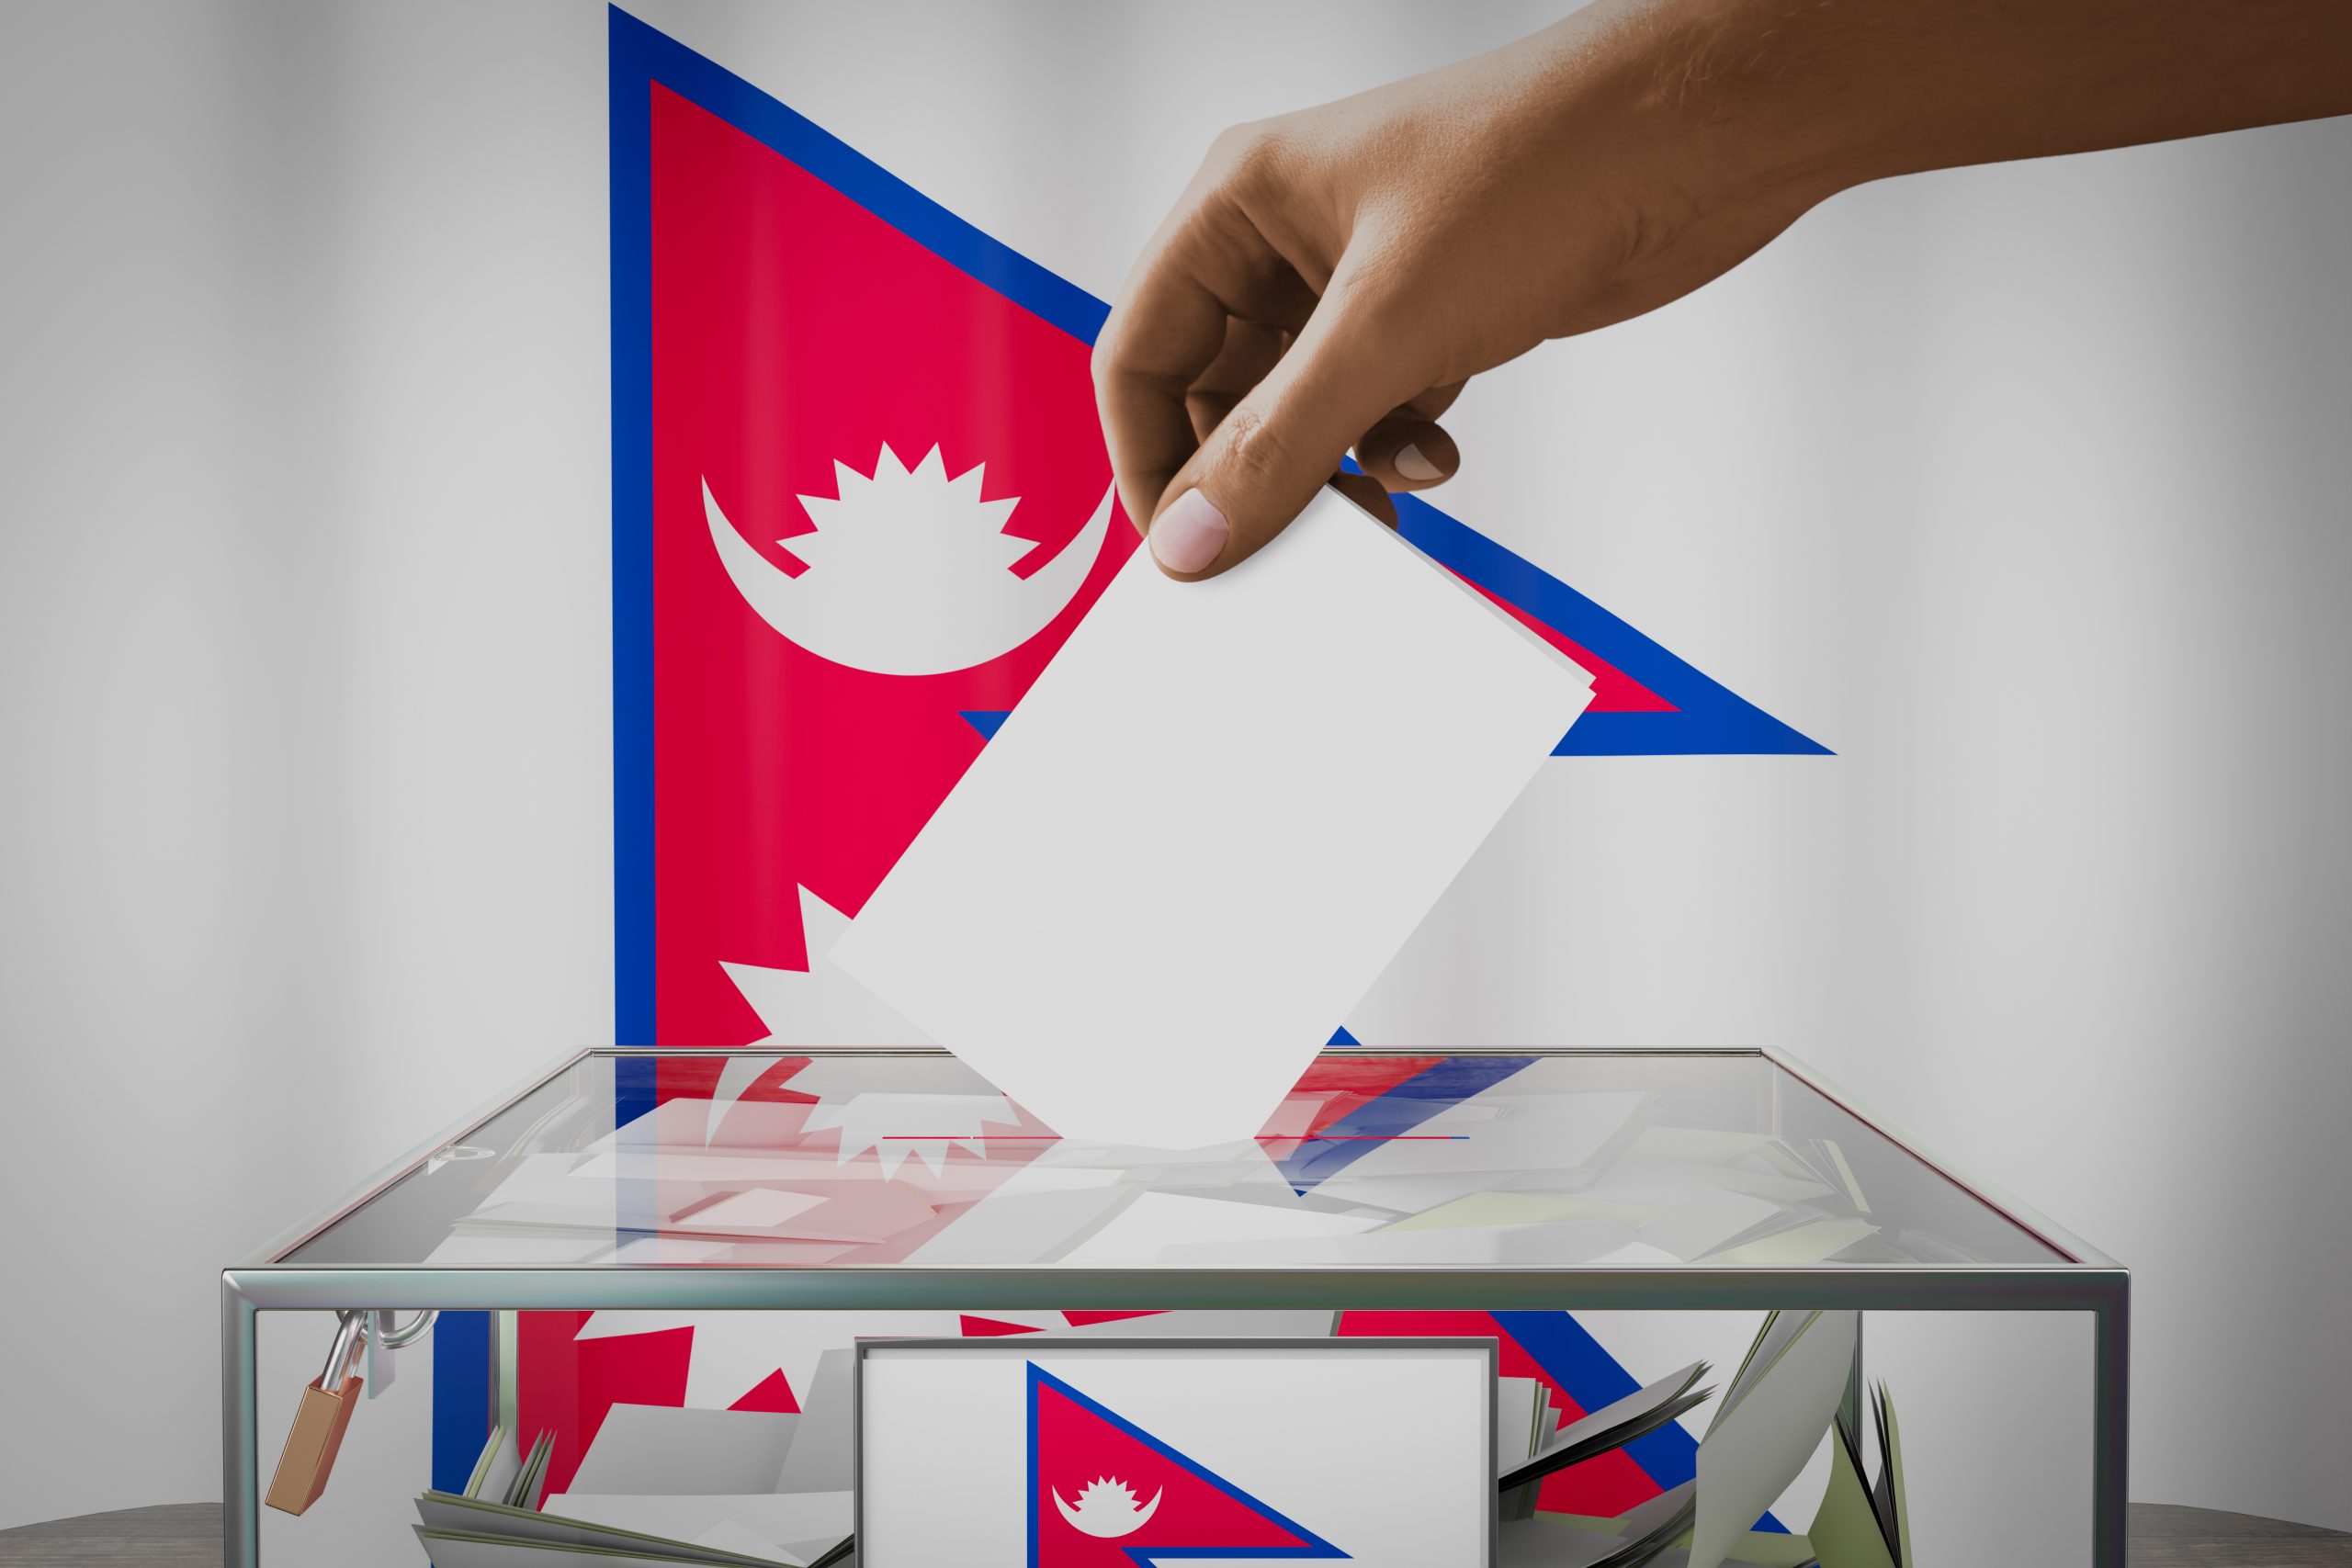 essay on youth participation in periodic election of nepal